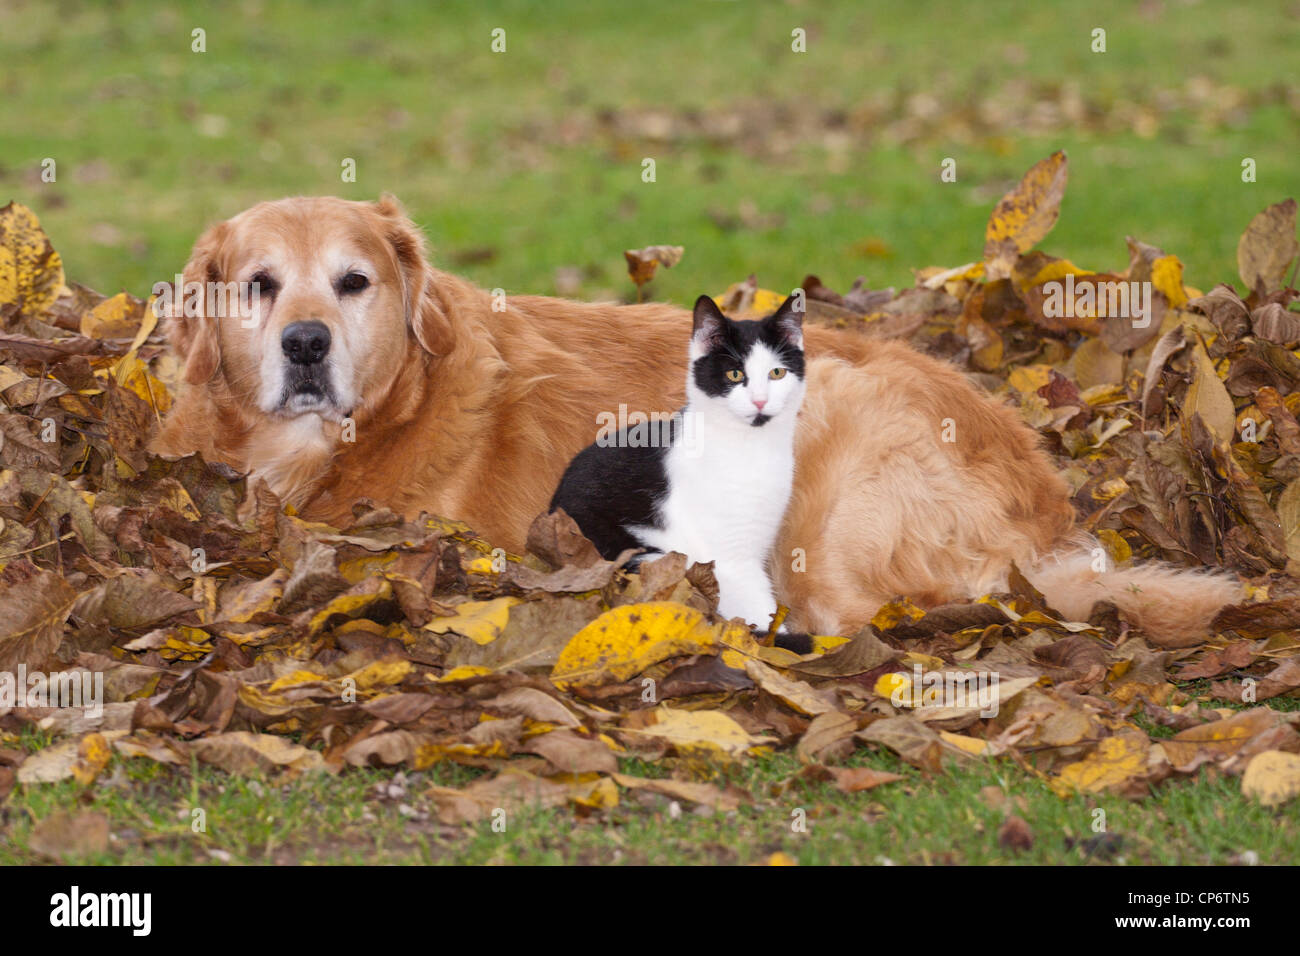 Cat and dog lying in the autumn leaves. Stock Photo